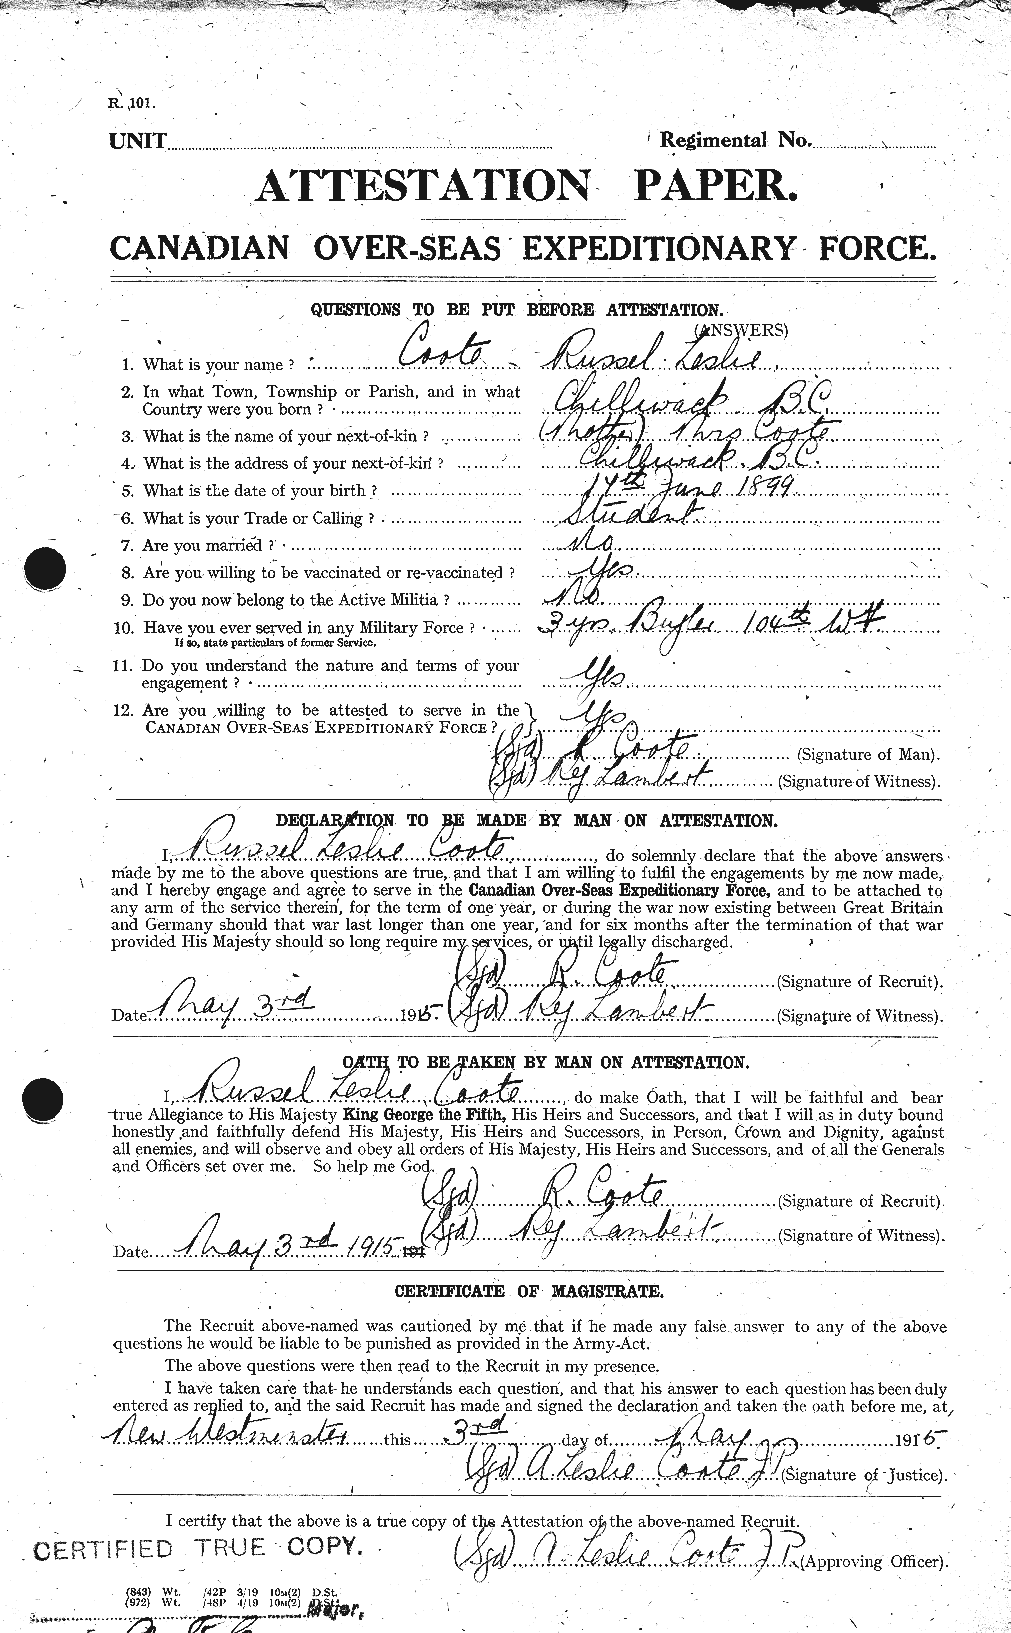 Personnel Records of the First World War - CEF 057497a